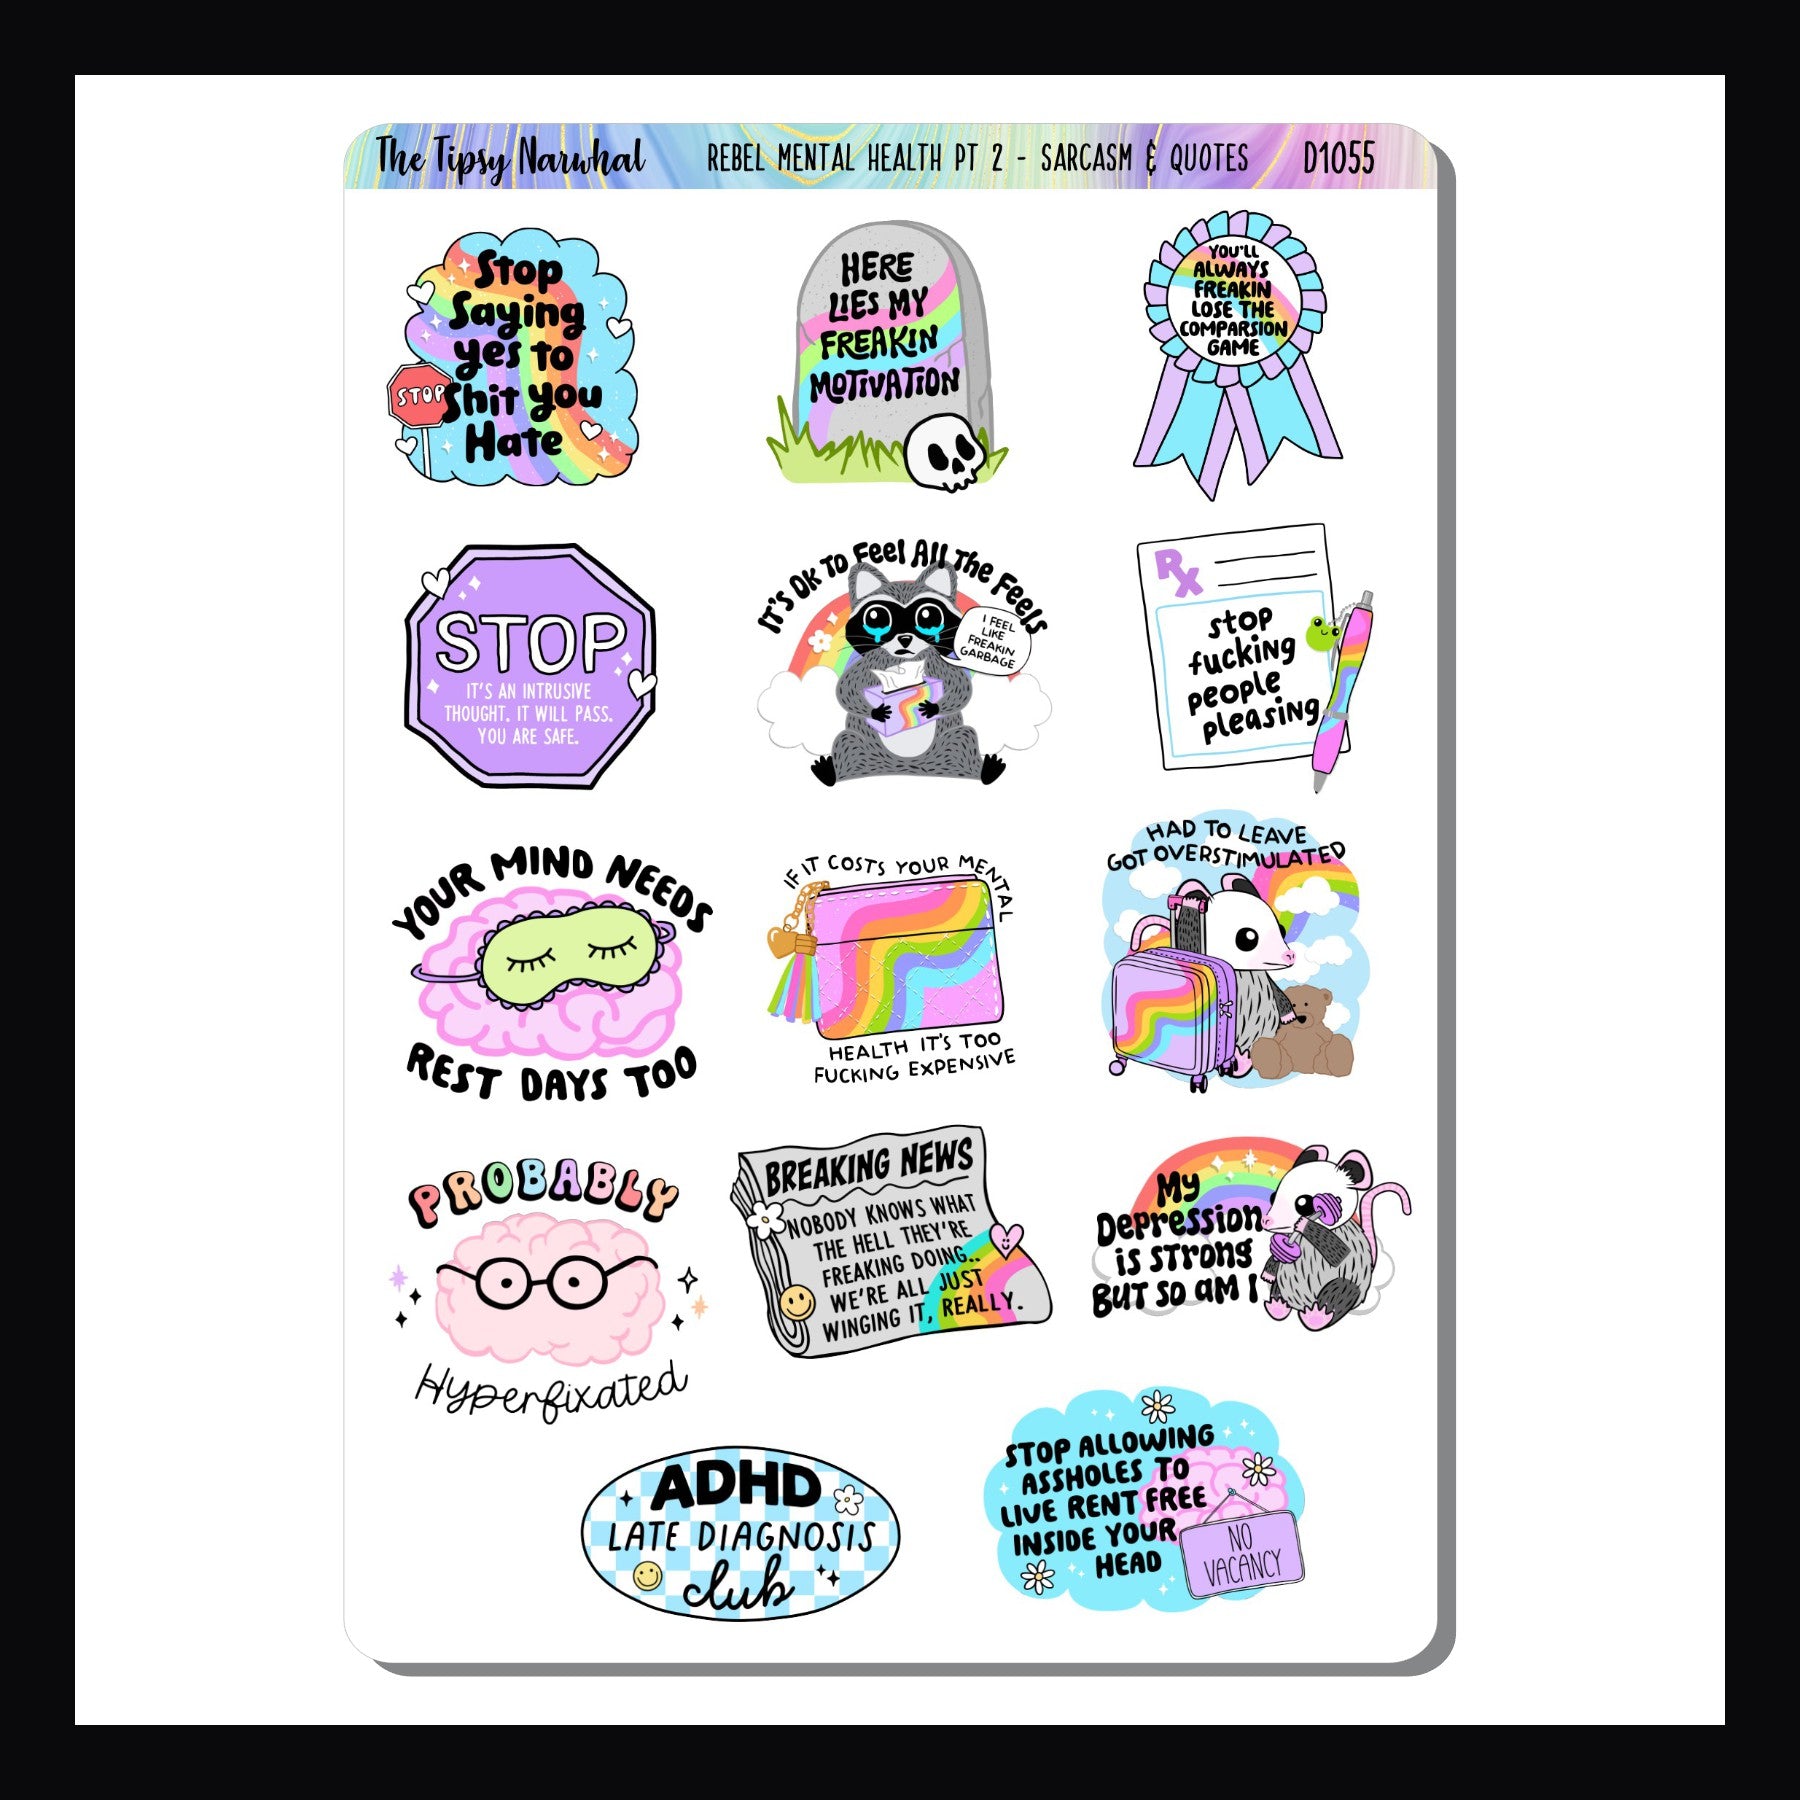 The Digital Rebel Mental Health Pt 2 Decor Sheet is a digital/printable version of the sticker sheet by the same name.  It features 14 colorful stickers each with a unique quote about mental health.  Sticker size varies by design.